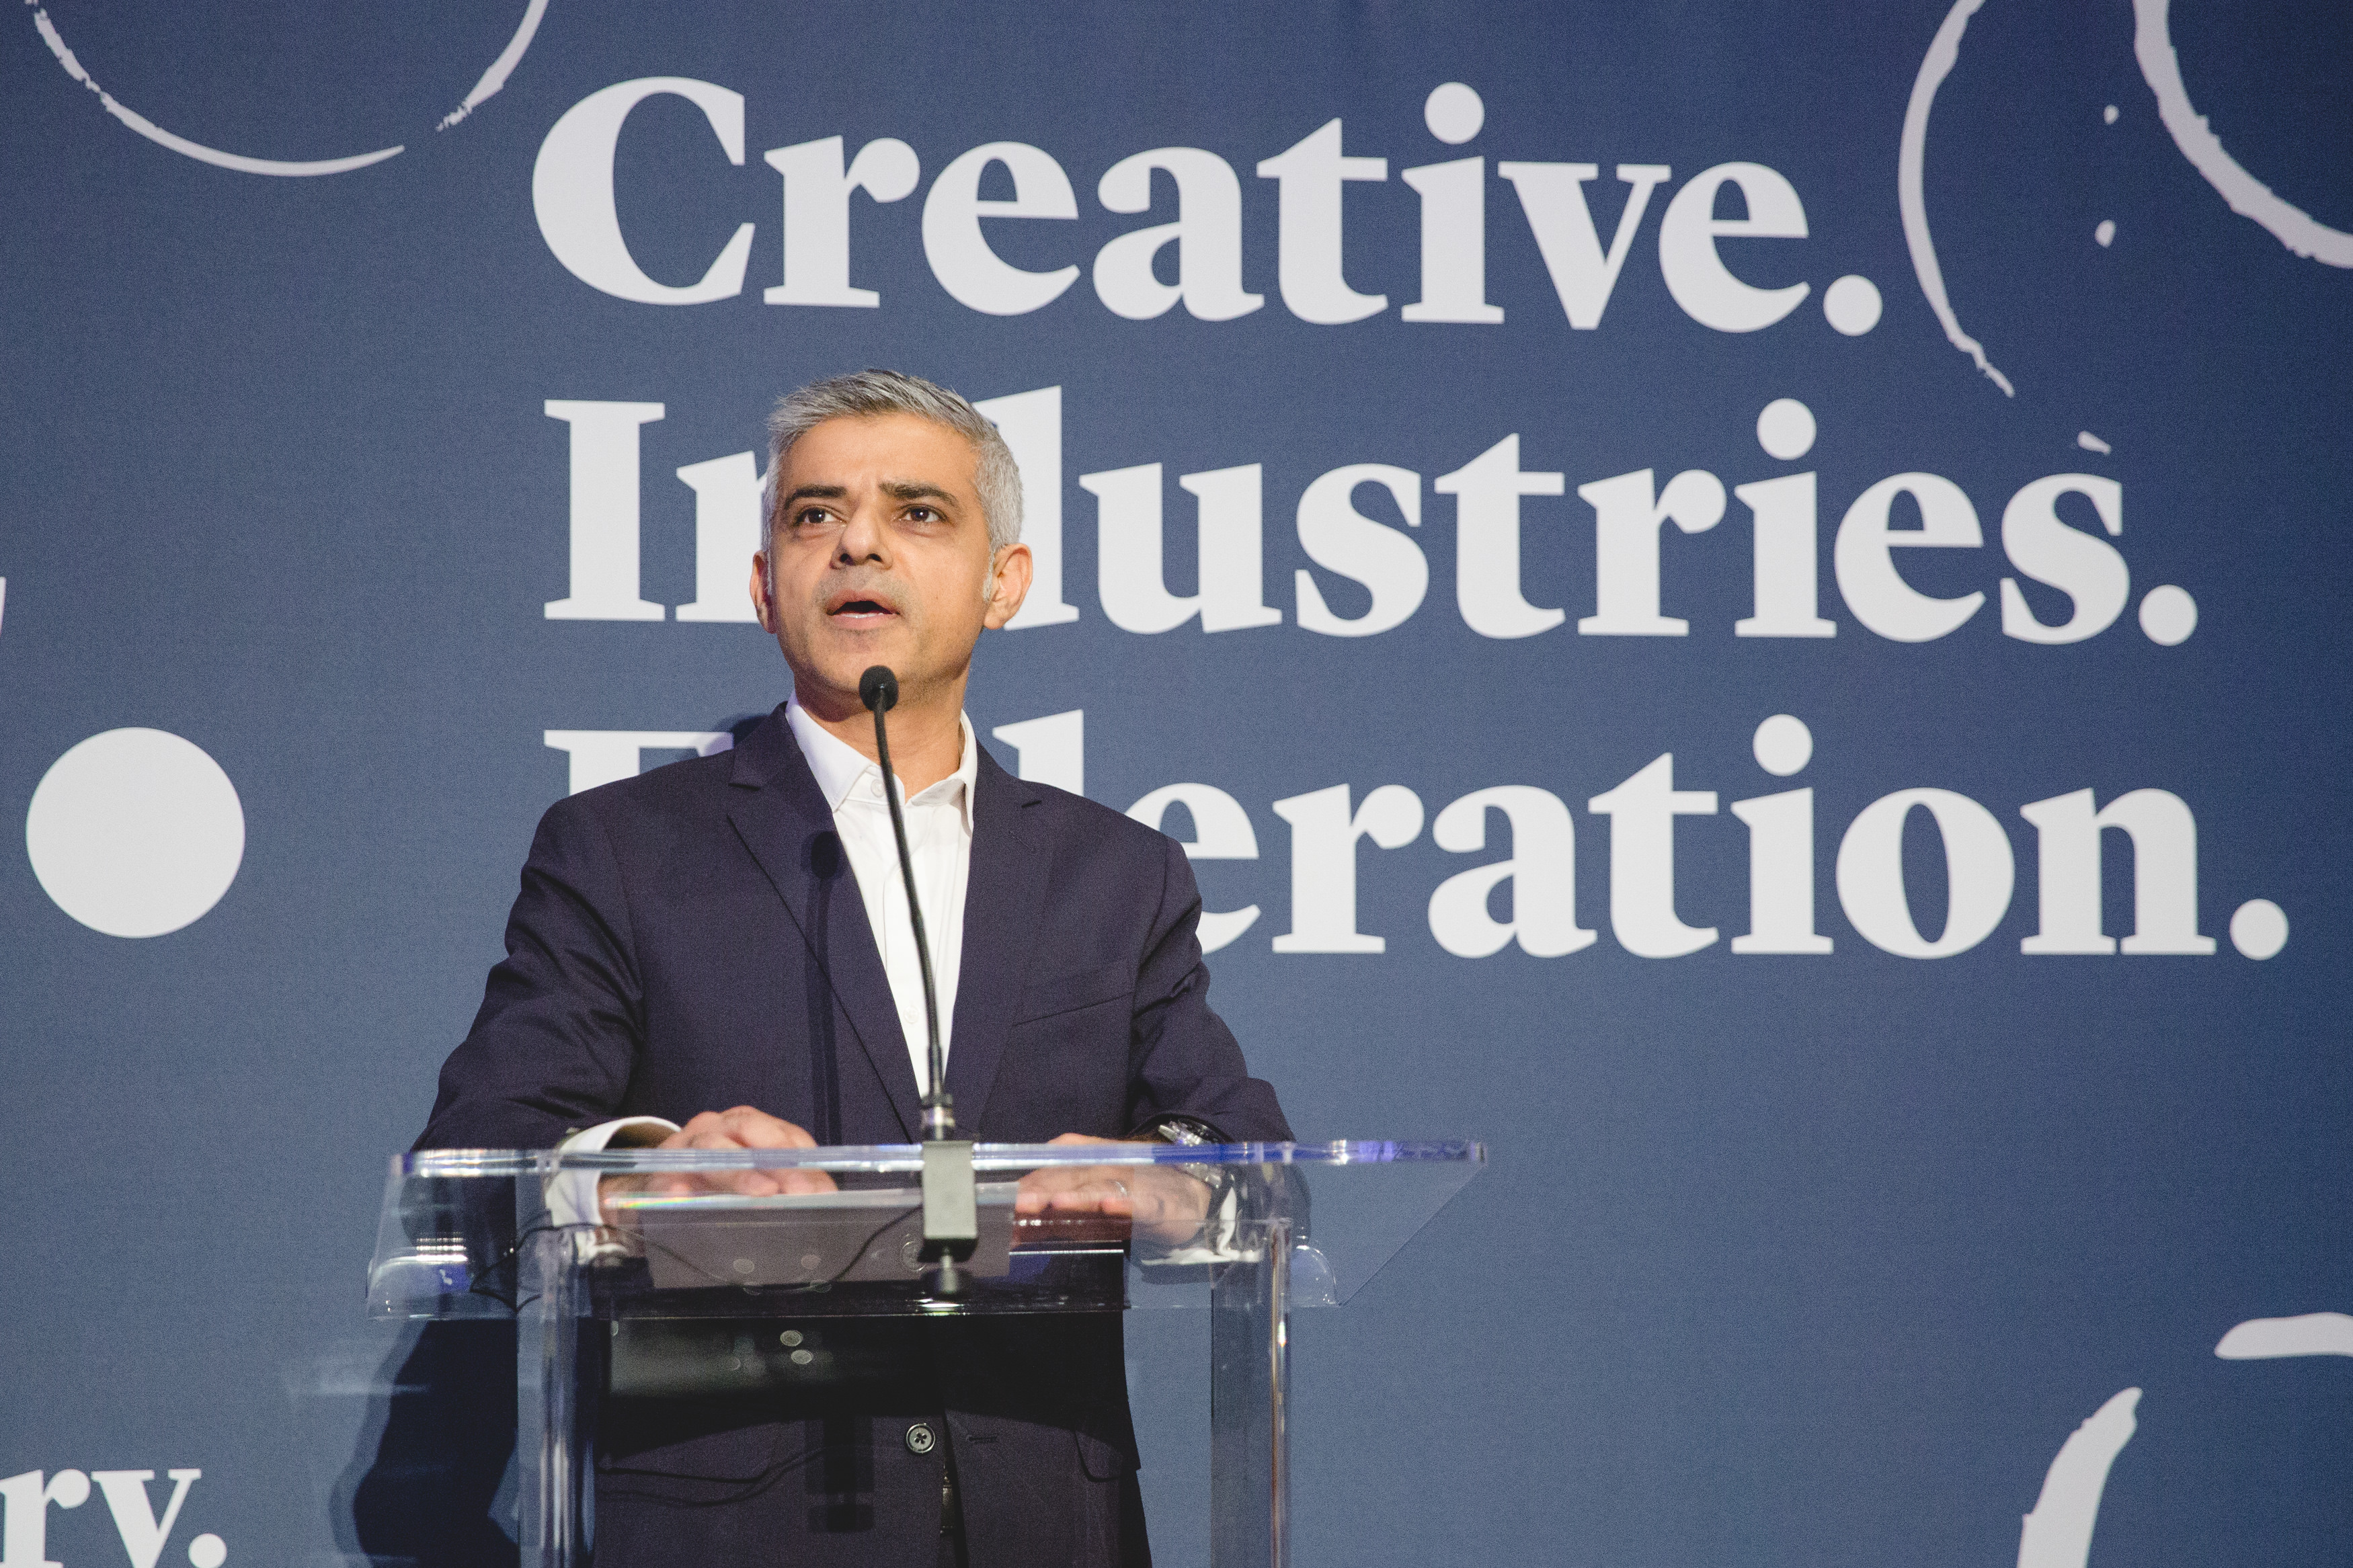 The second anniversary of the Creative Industries Foundation.